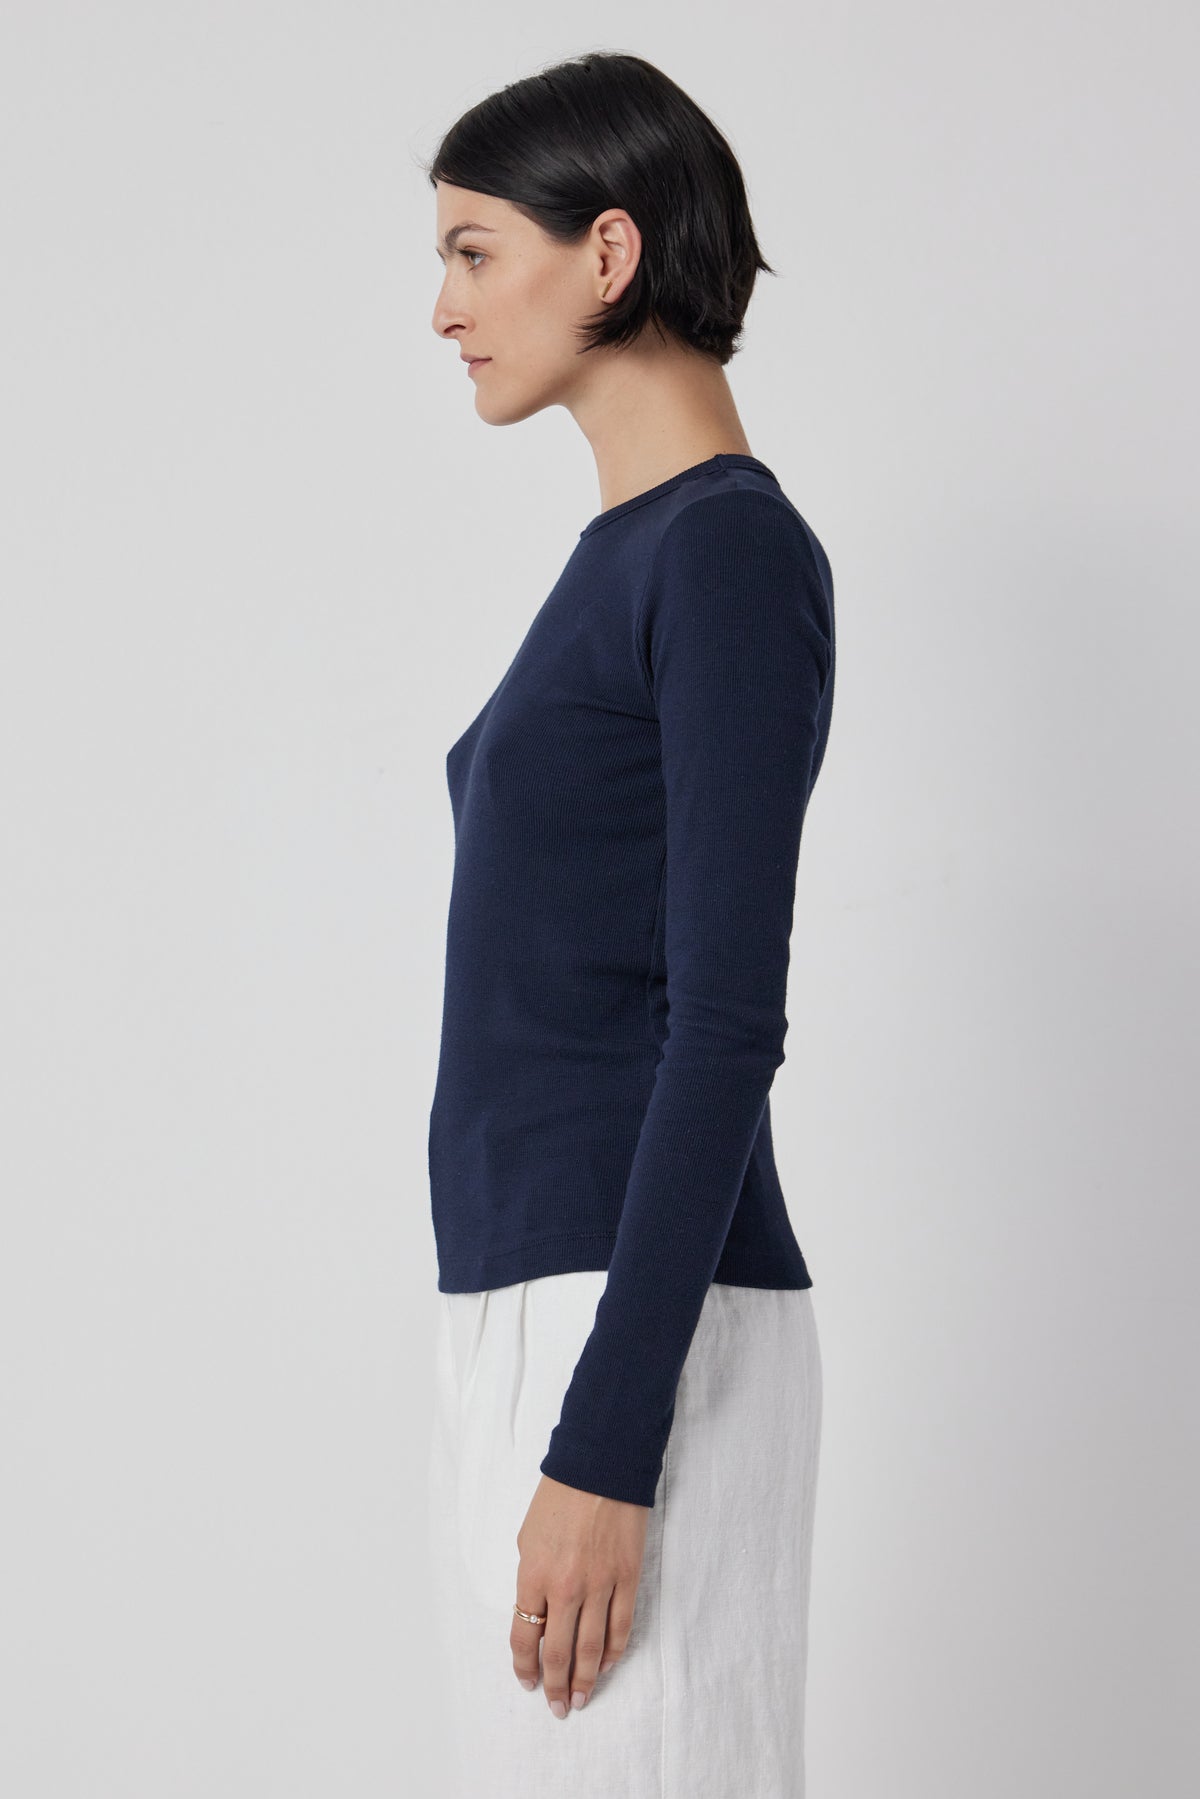 Woman standing in profile wearing a dark blue long-sleeve Camino Tee by Velvet by Jenny Graham and white pants against a neutral background.-36463422013633